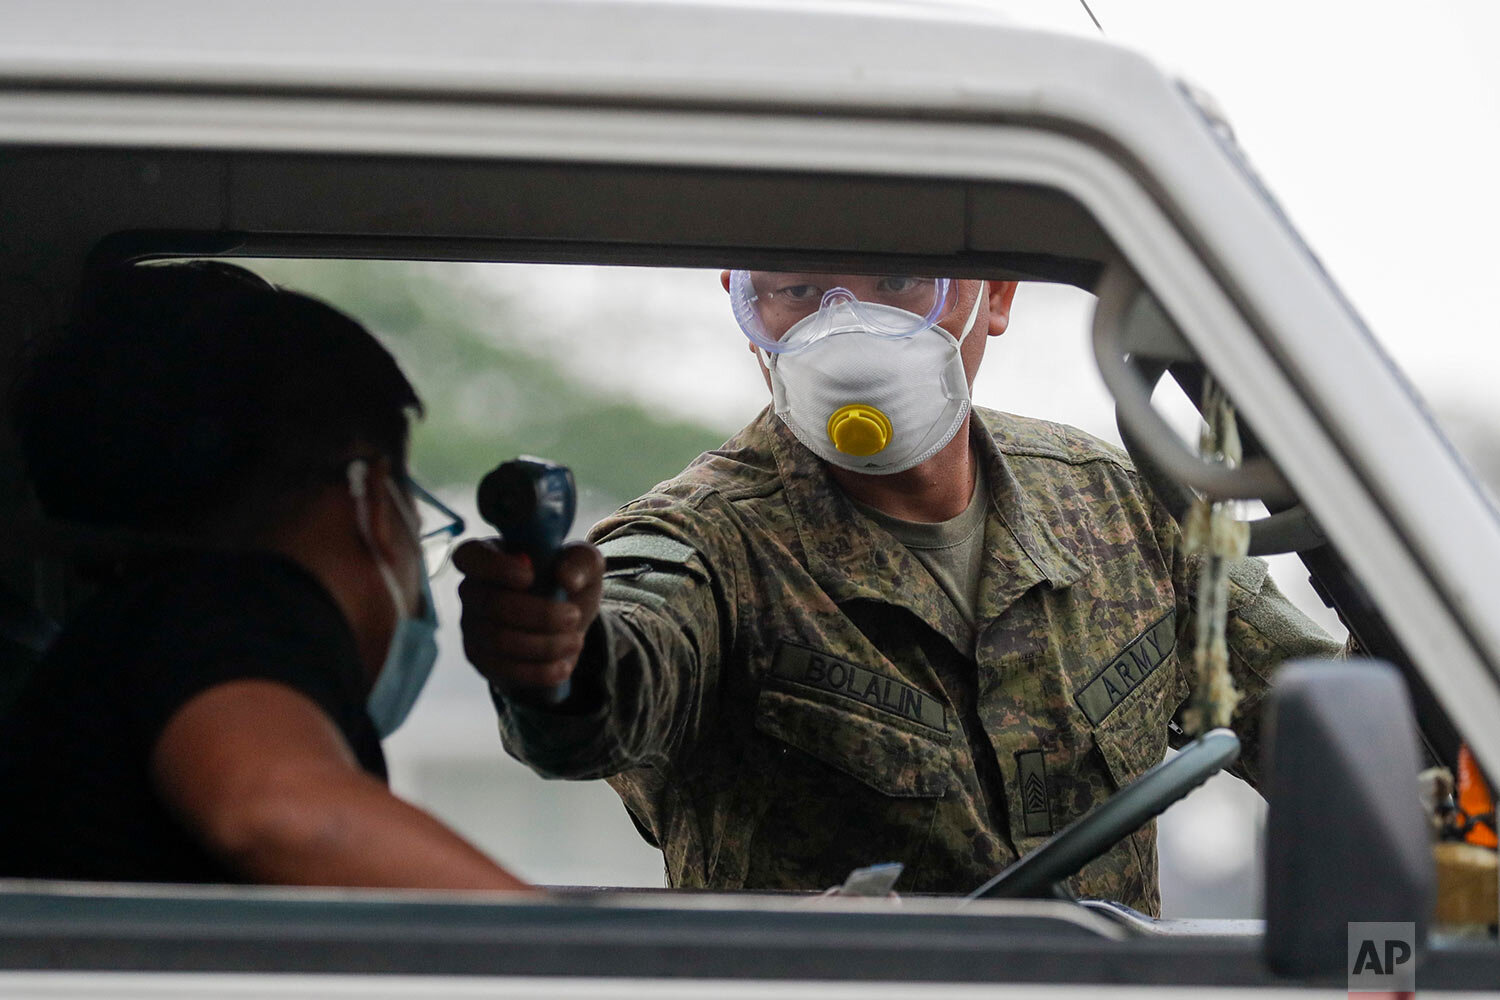  An army trooper uses a thermal scanner to check the temperature of people entering the metropolis at a checkpoint on the outskirts of Quezon city, Philippines, Sunday, March 15, 2020. (AP Photo/Aaron Favila) 